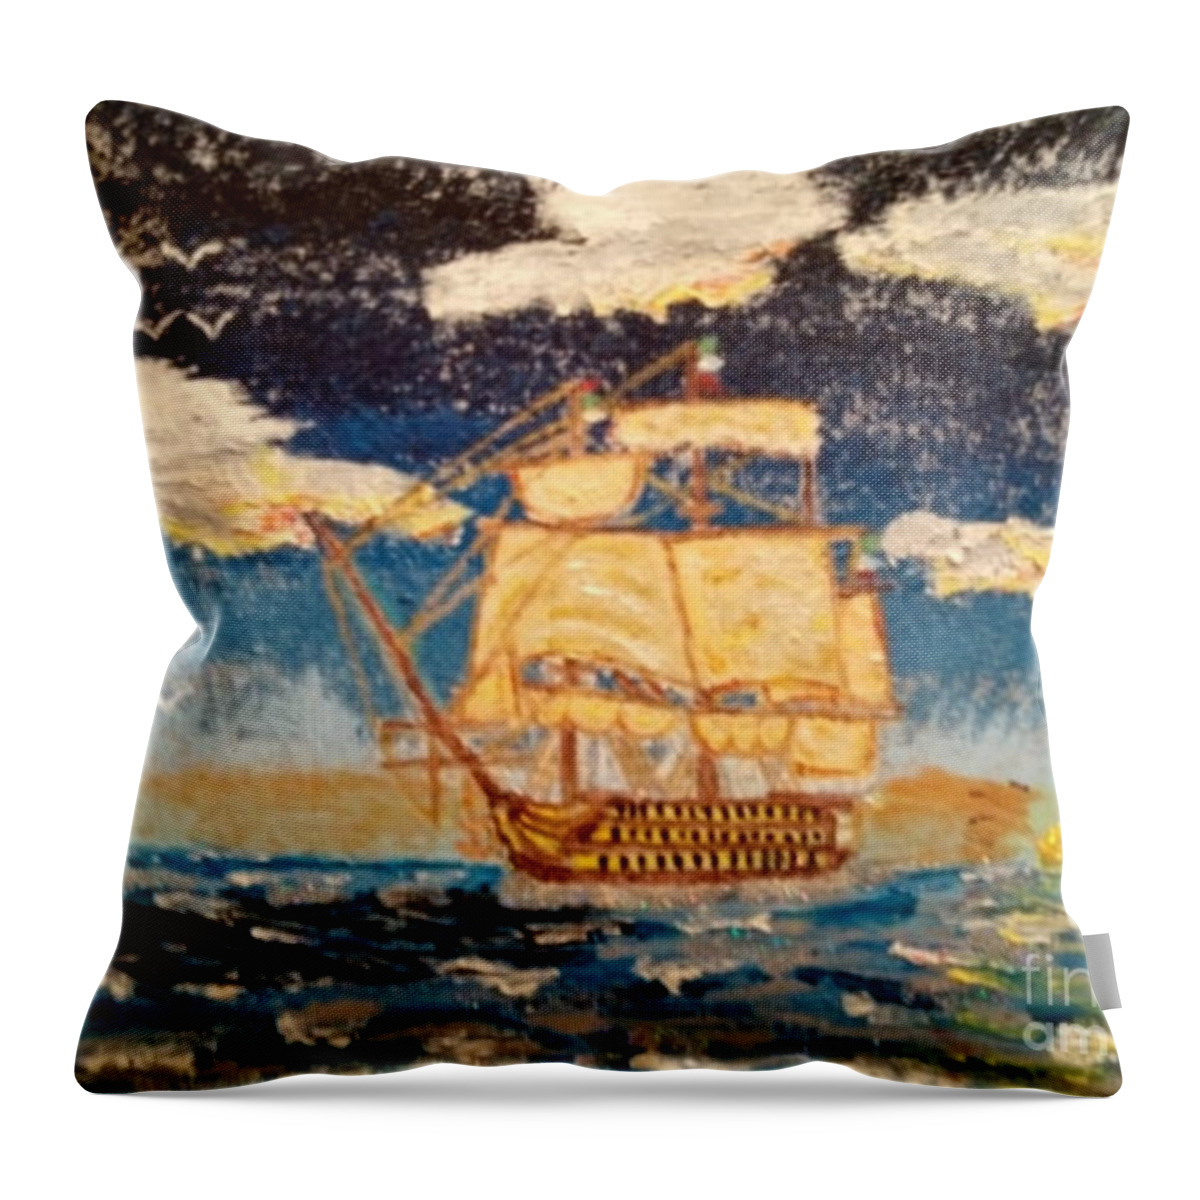 Ship Throw Pillow featuring the painting Silver Seas by David Westwood